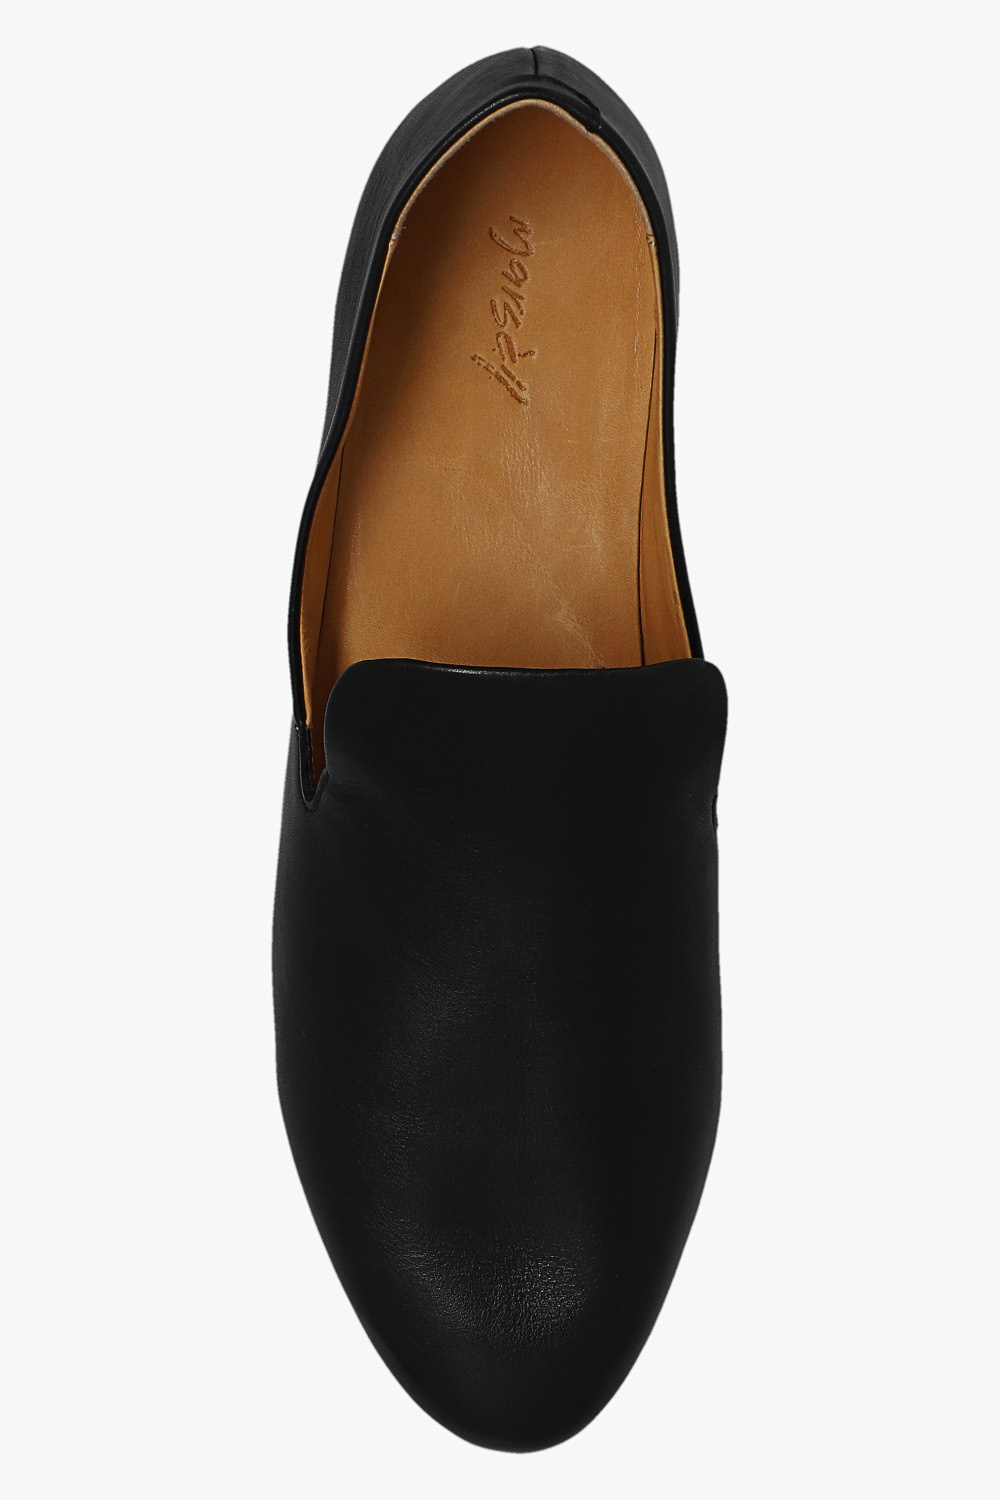 MarBrendy ‘Coltellino’ leather shoes